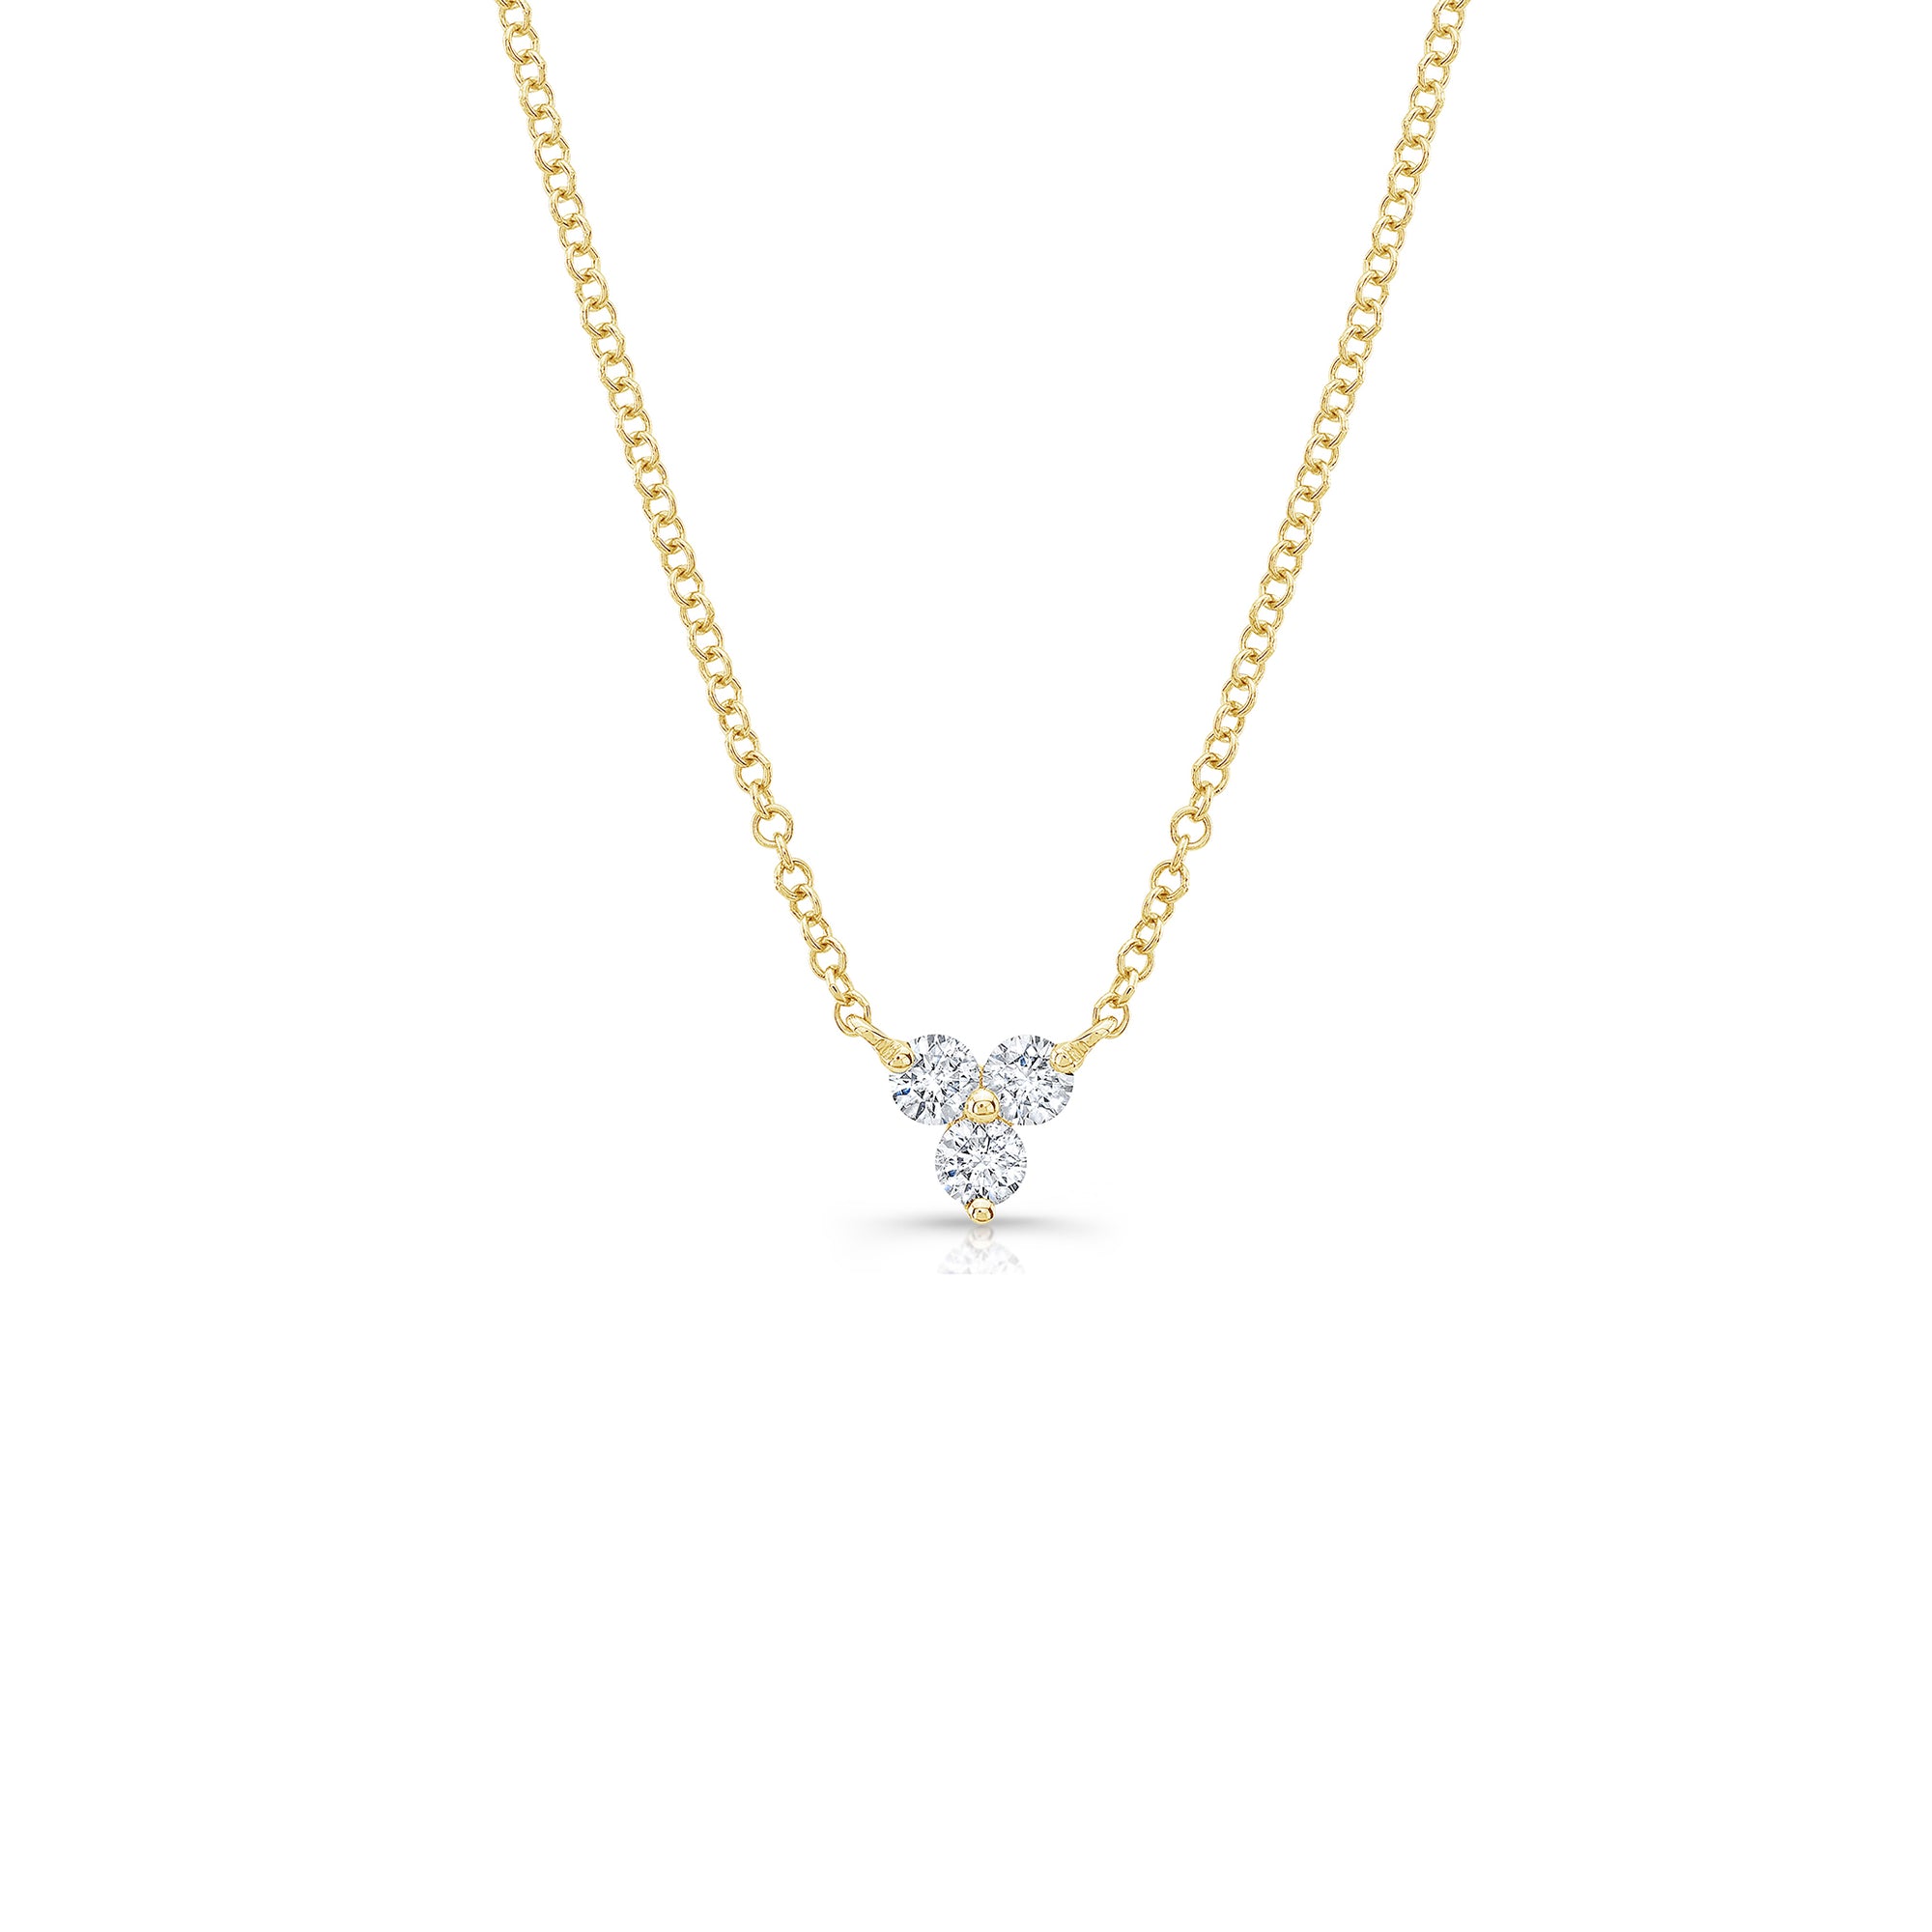 Diamond Three-Stone Necklace  -14K gold weighing 1.58 grams  -3 round diamonds totaling .20 carats